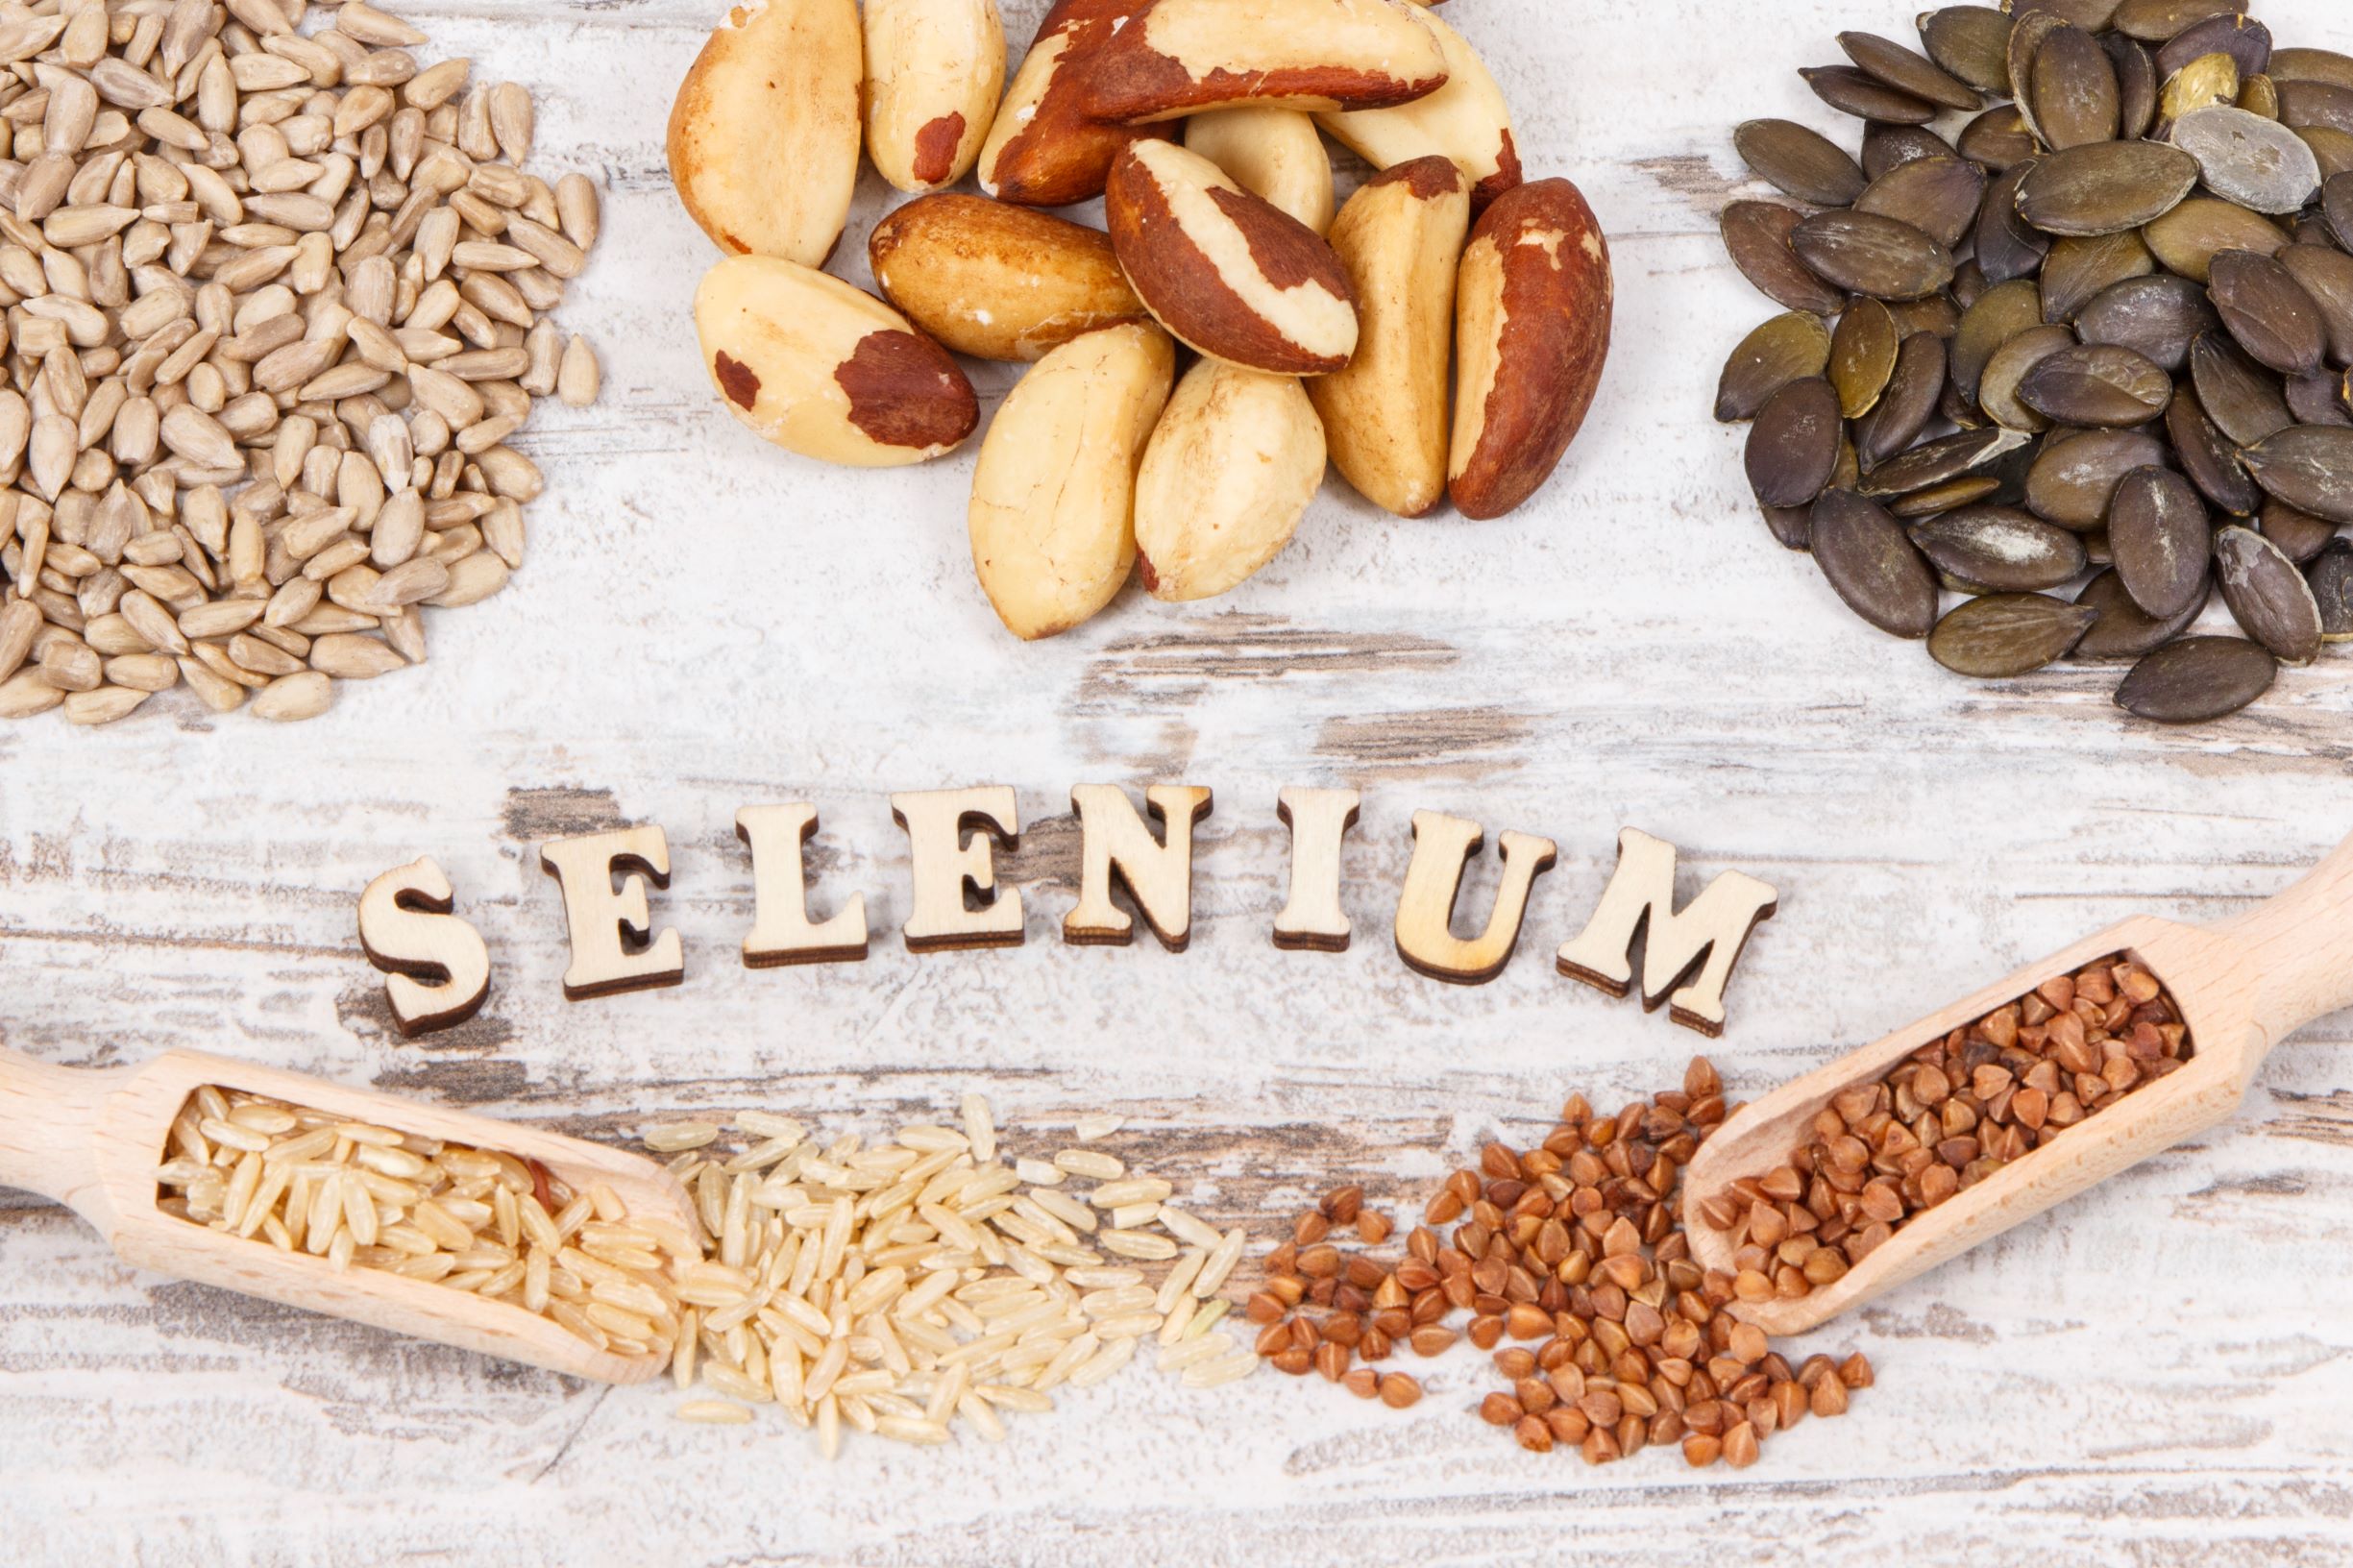 Selenium helps prevent cardiovascular disease because of its anti-oxidant properties.